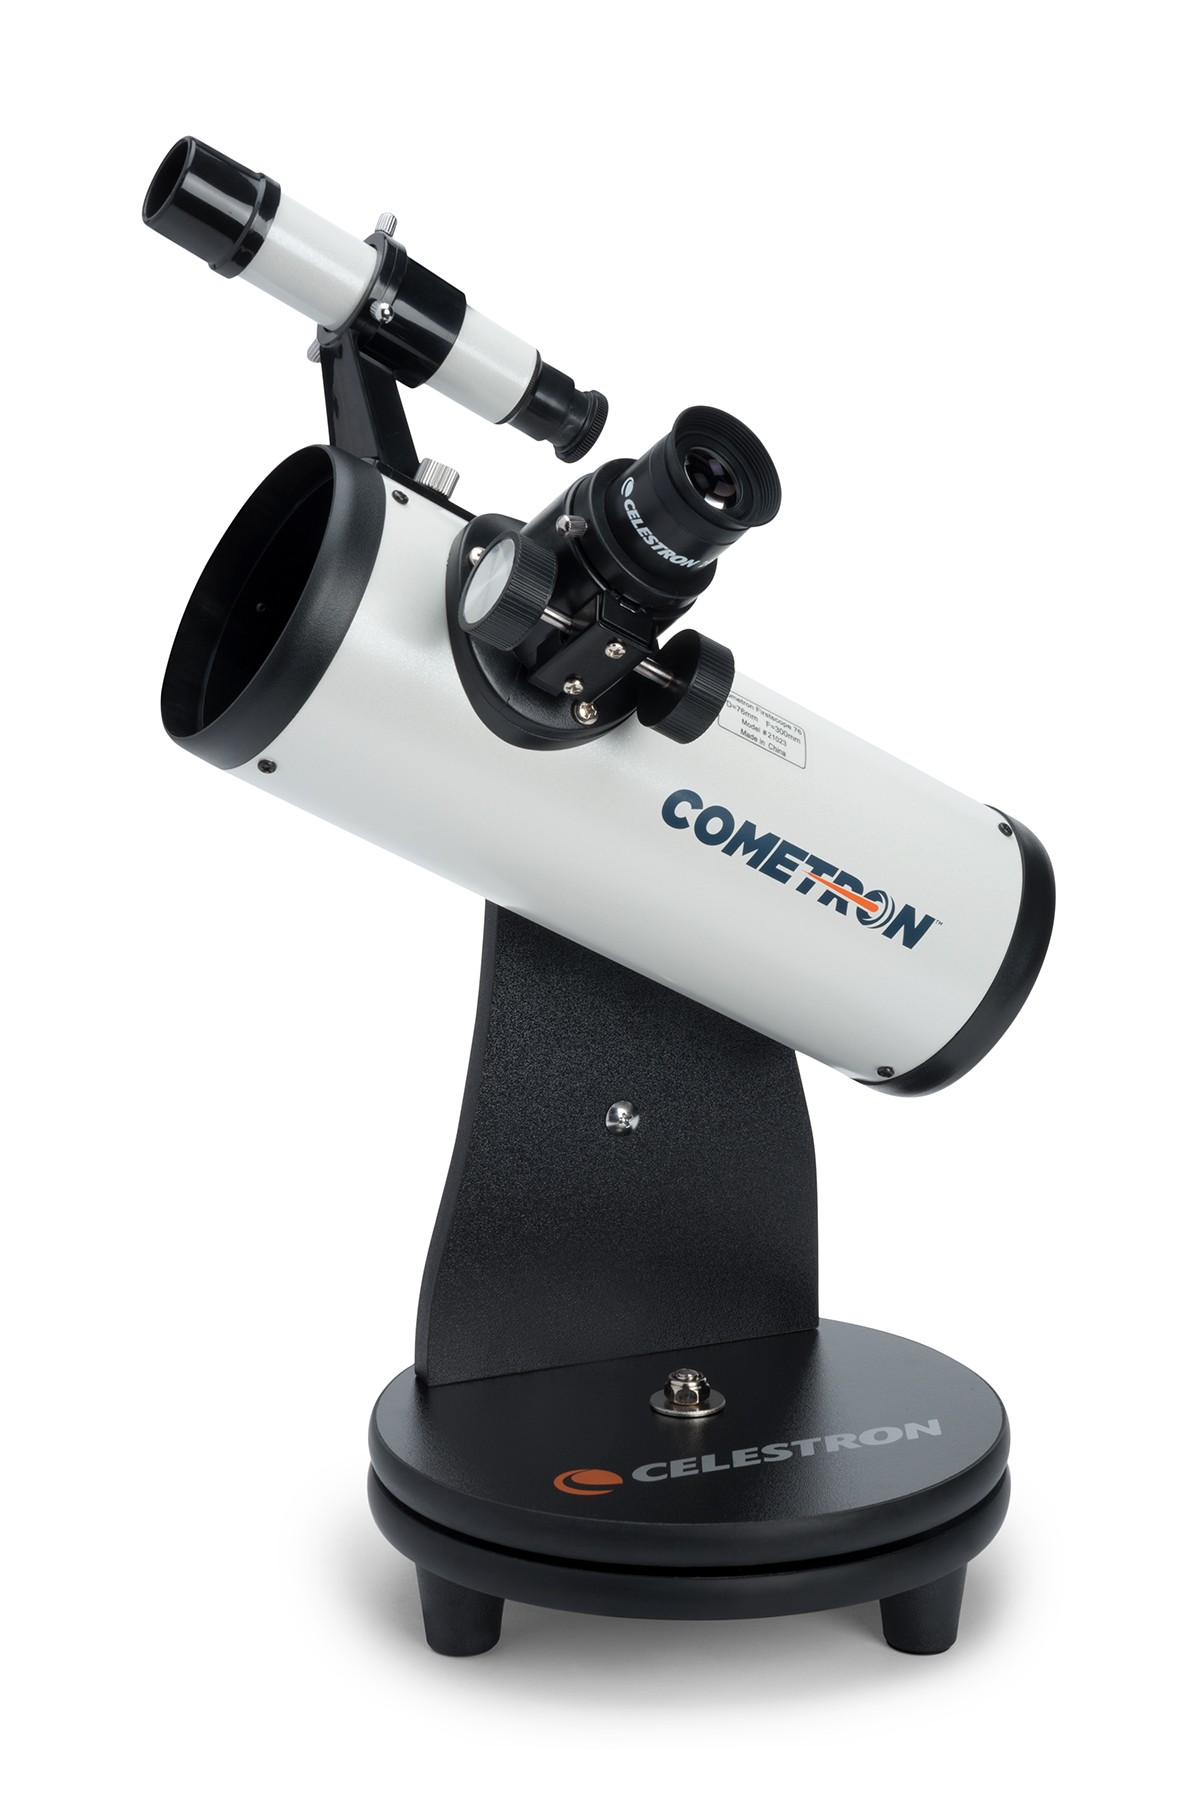 Cometron FirstScope 76